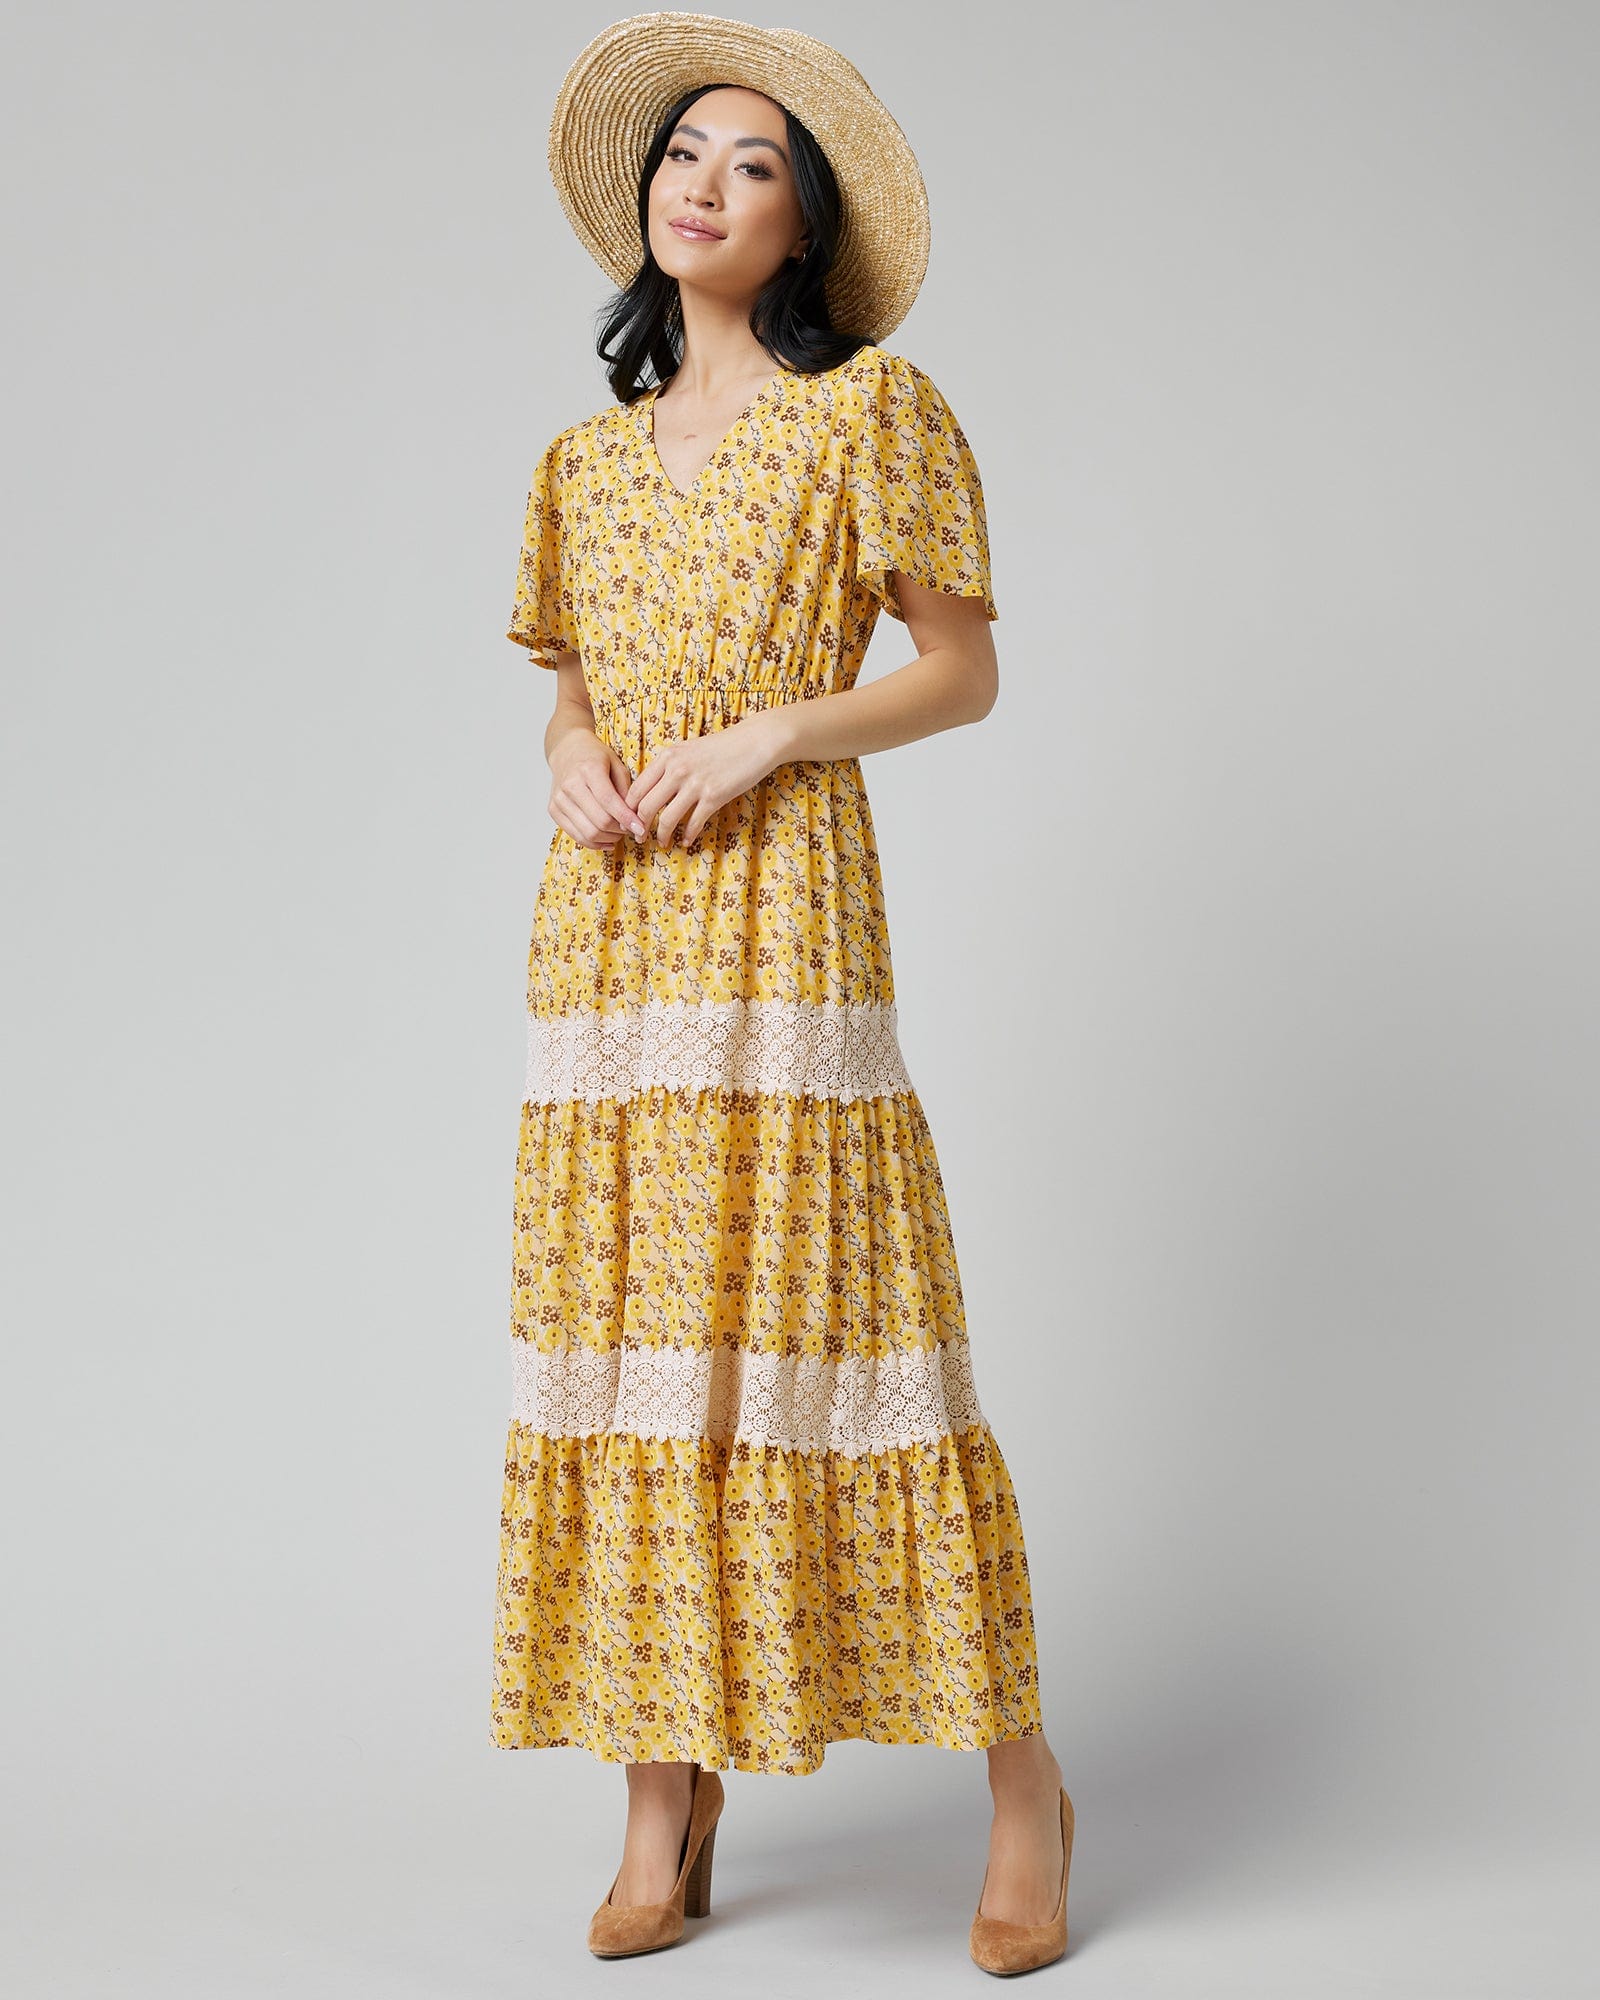 Woman in a short sleeve, maxi-length, yellow with floral print dress